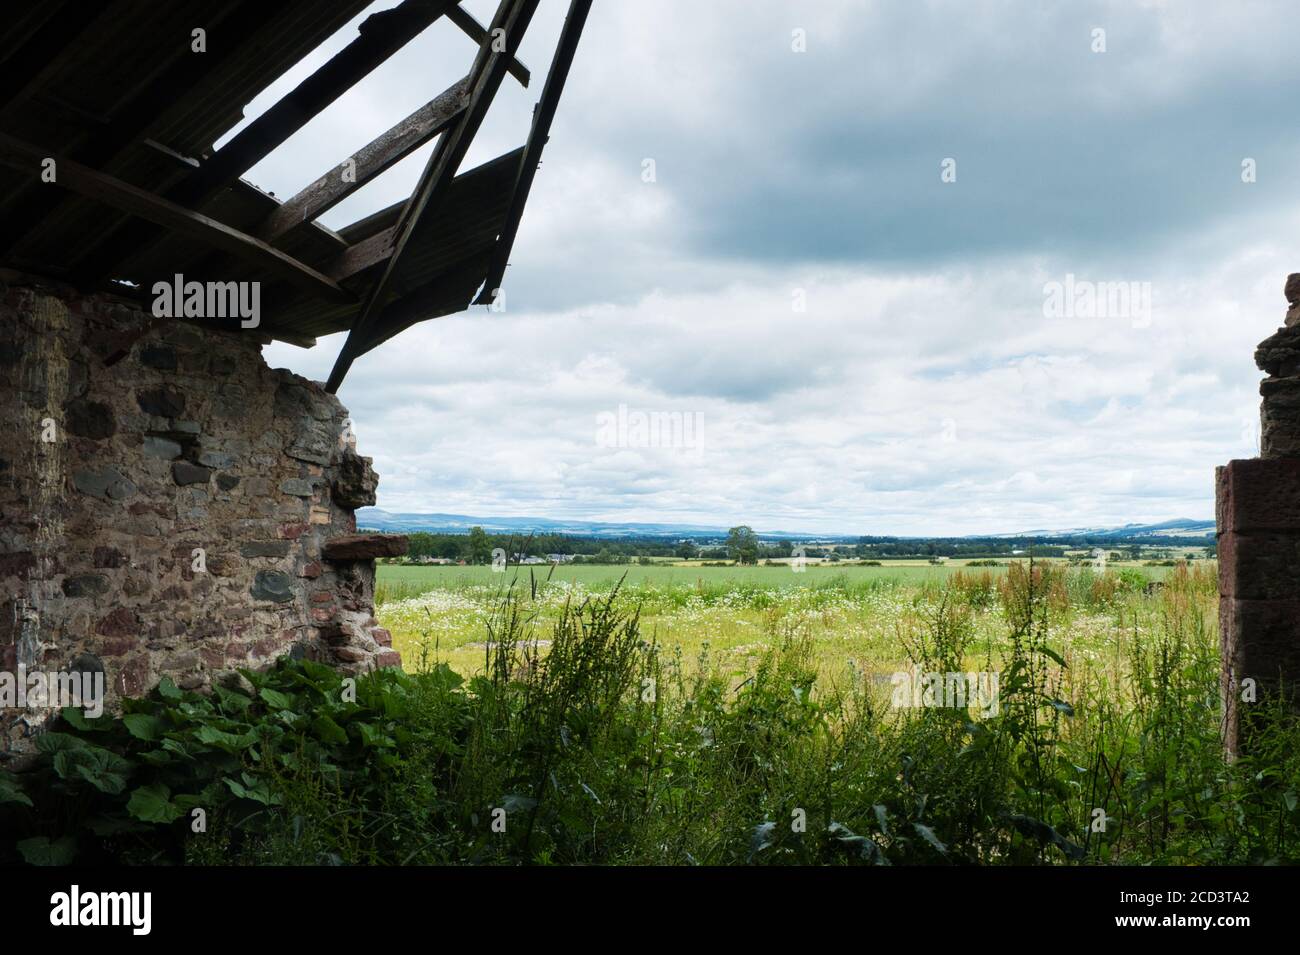 Looking from the remains of an old farm building through weeds foreground, to crop of oats and farmland.Dark clouds indicate that a storm is brewing. Stock Photo